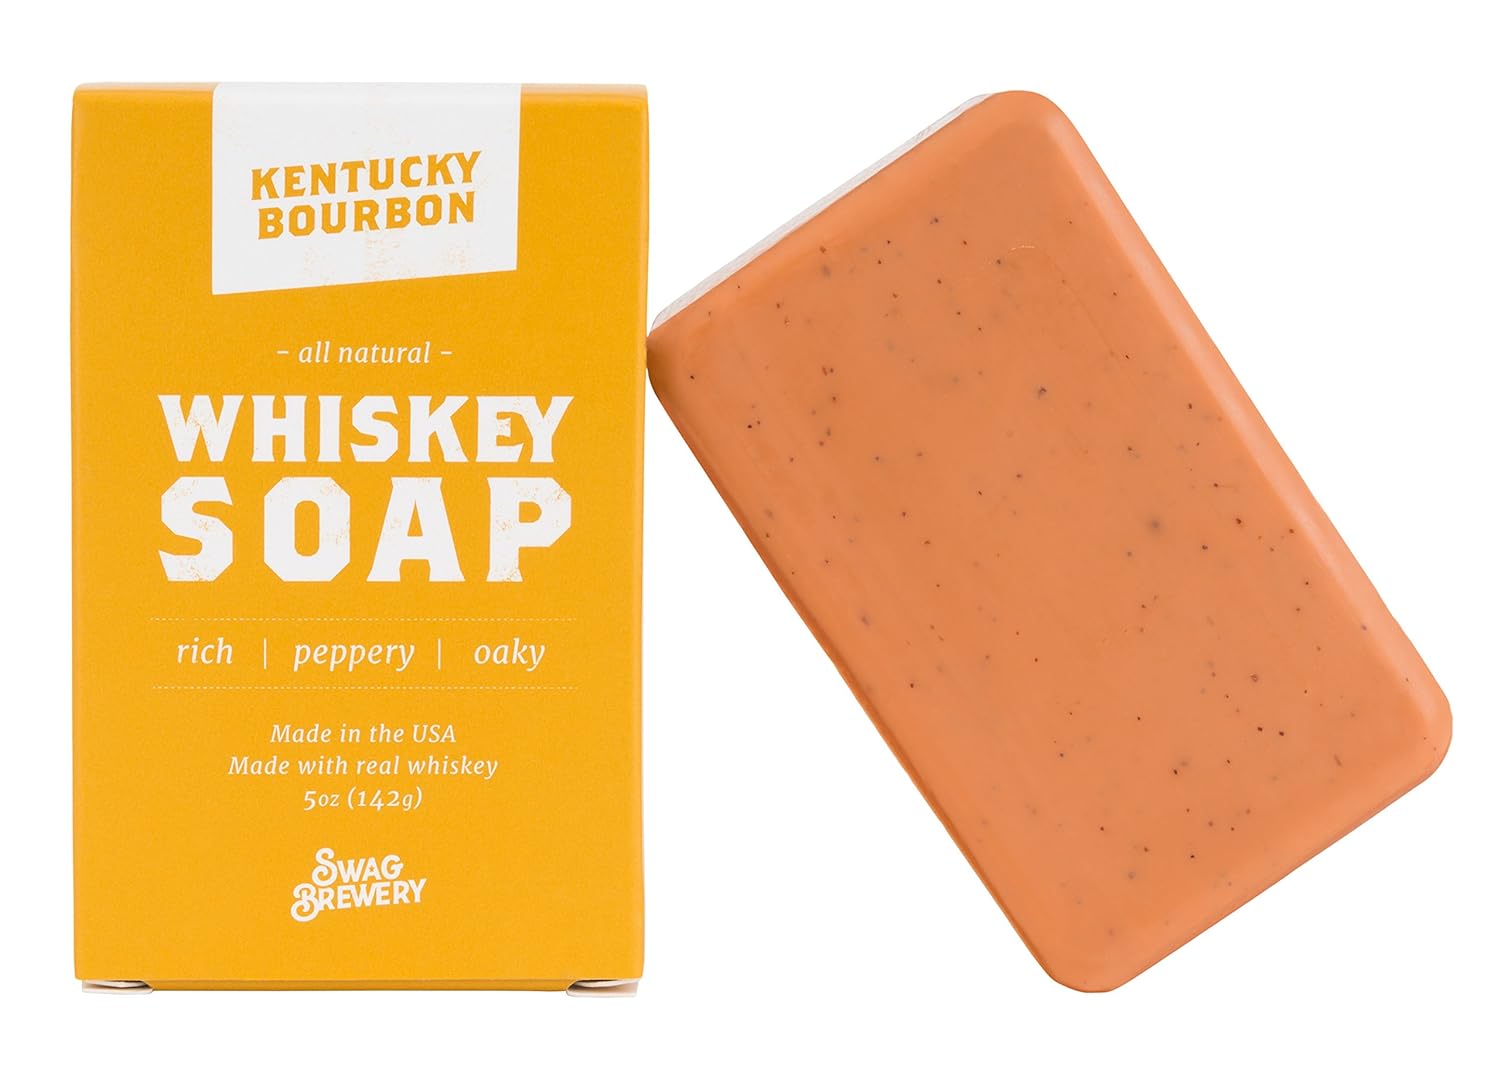 Kentucky Bourbon Whiskey Soap - Great Gift for Whiskey Lovers